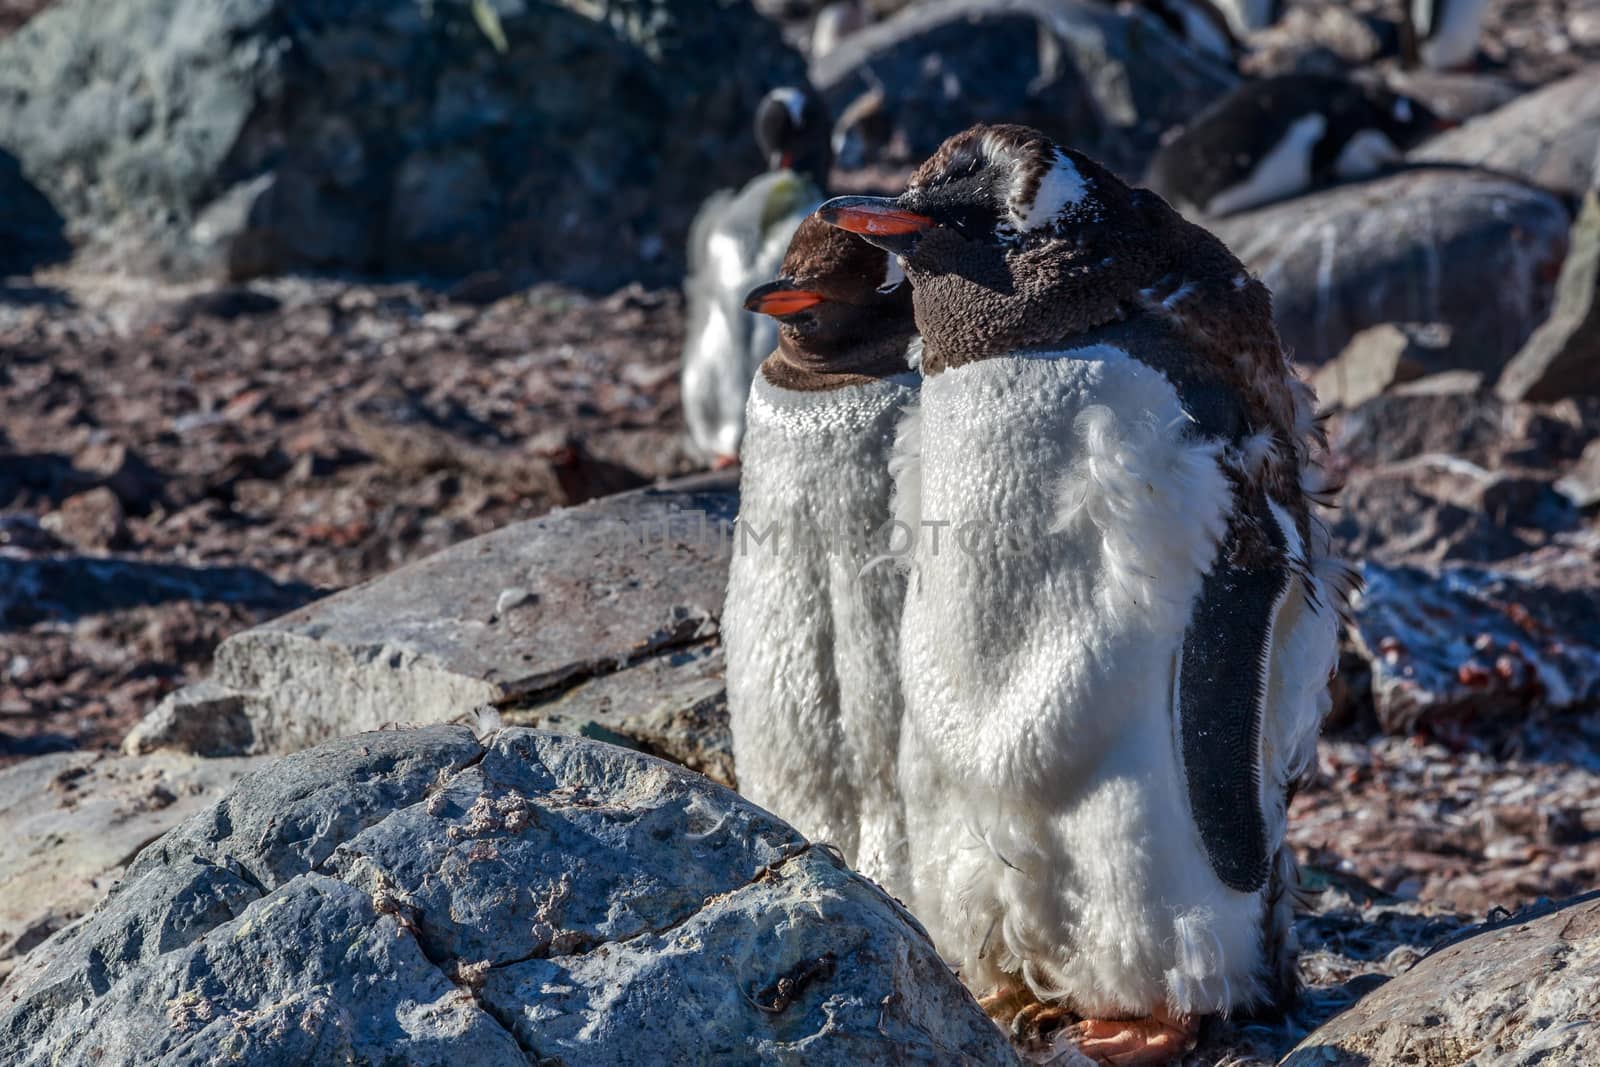 Gentoo penguins couple standing on the rocks, Cuverville Island, by ambeon